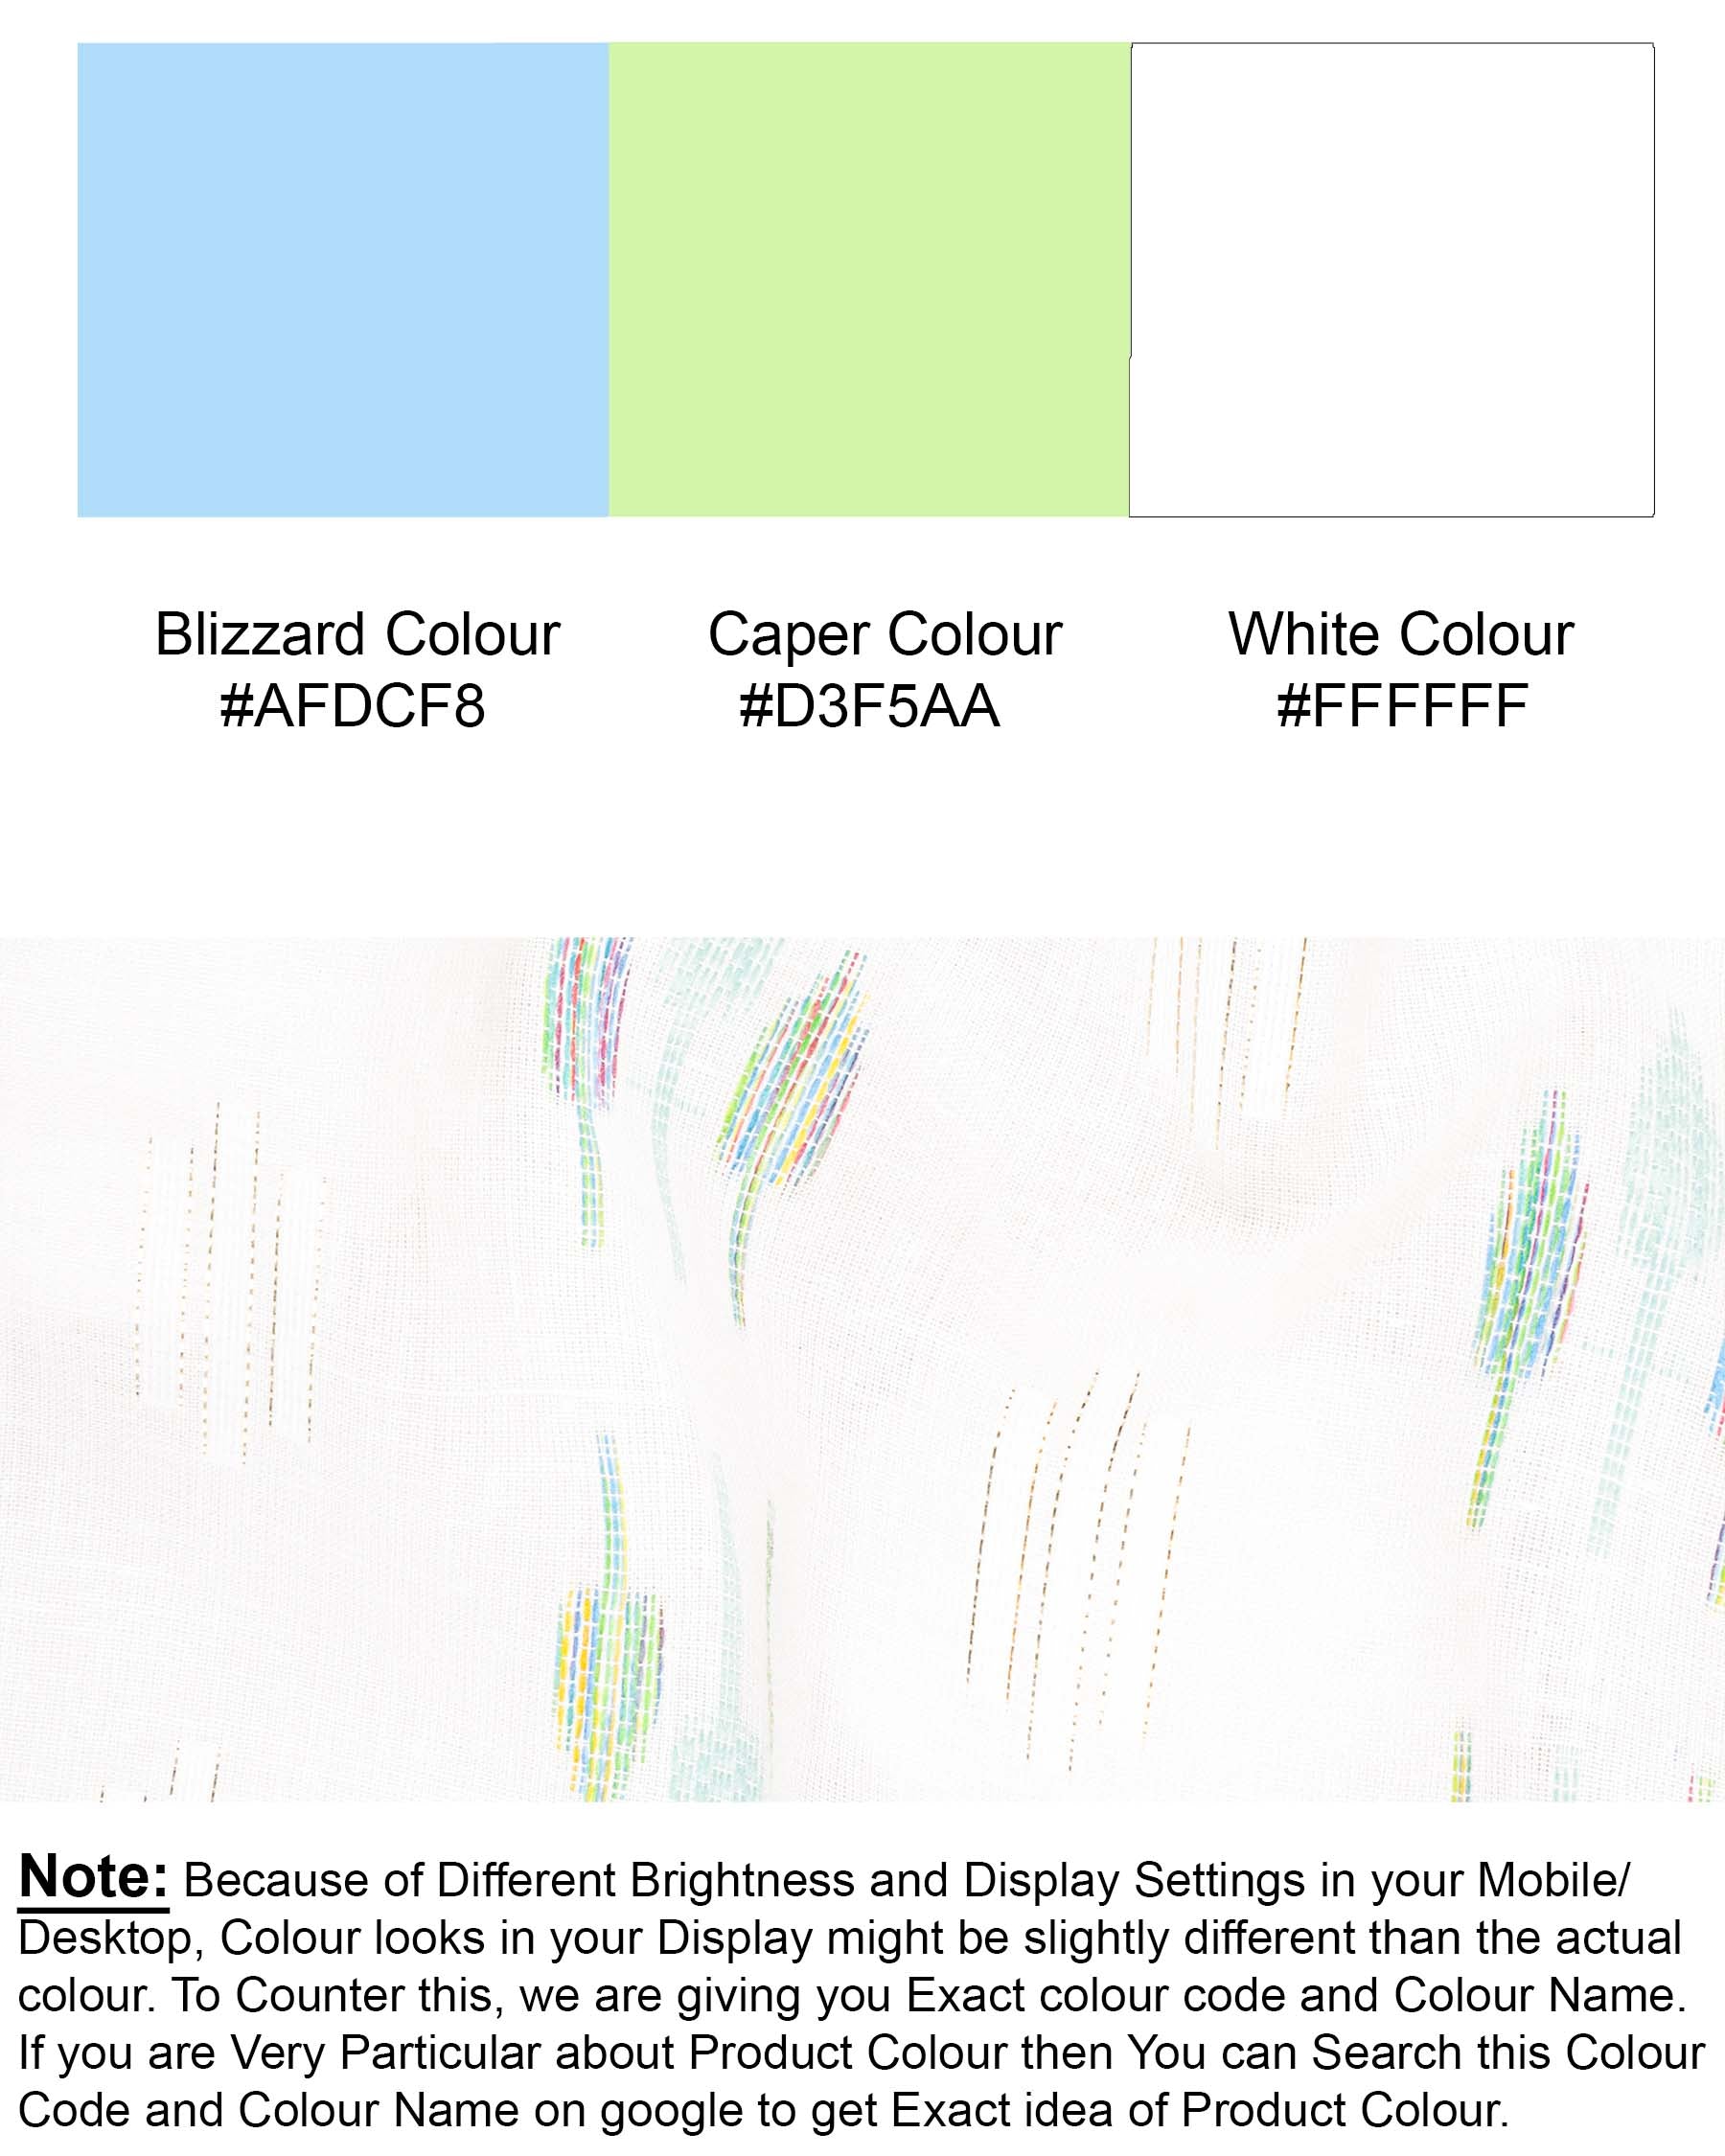 Bright White with colorful Leaves Jacquard Textured Premium Giza Cotton Kurta KT010-39, KT010-40, KT010-42, KT010-44, KT010-46